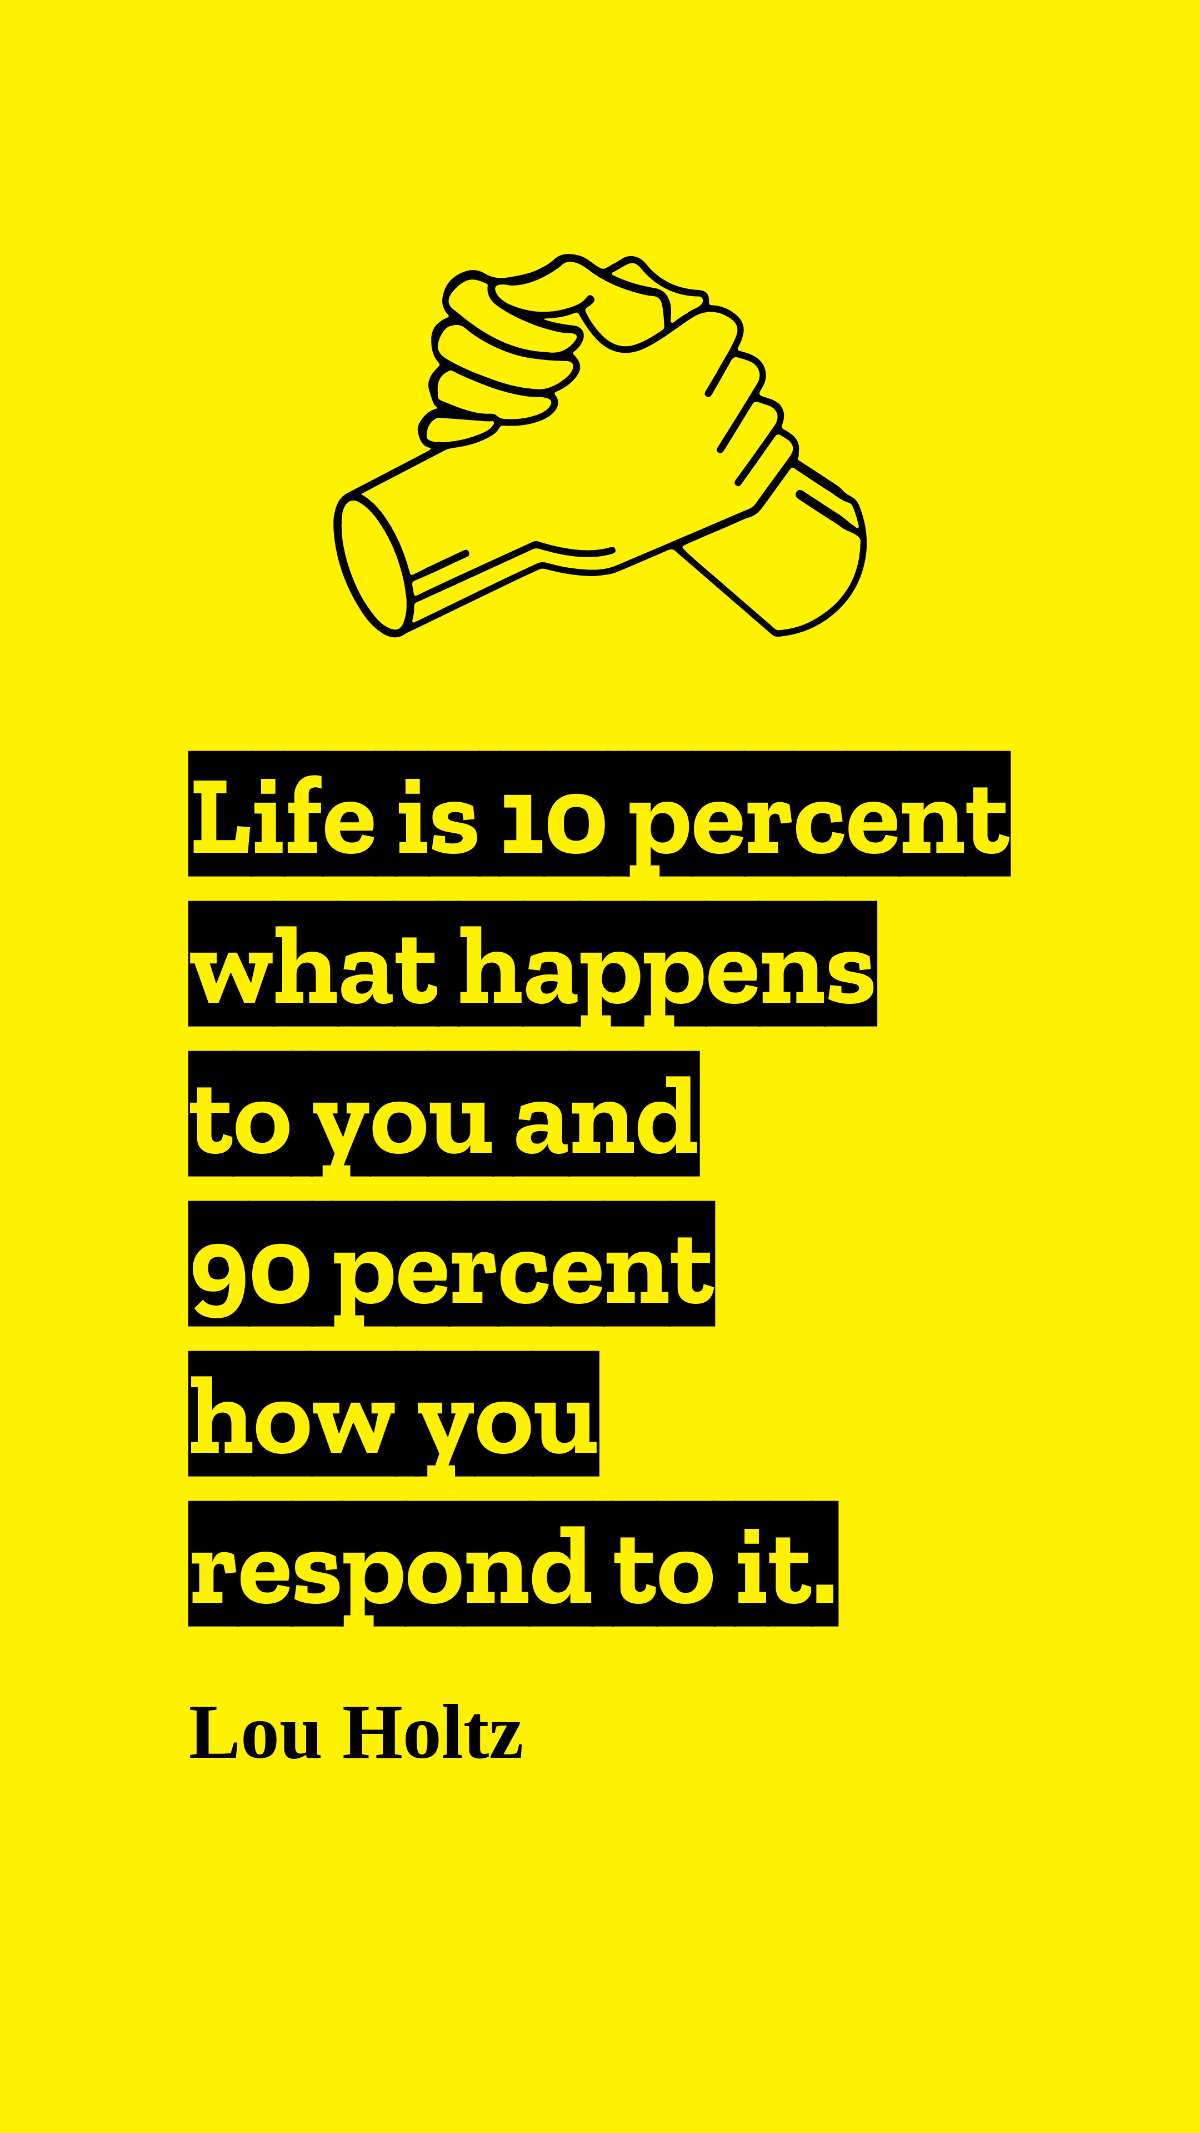 Lou Holtz - Life is 10 percent what happens to you and 90 percent how you respond to it.